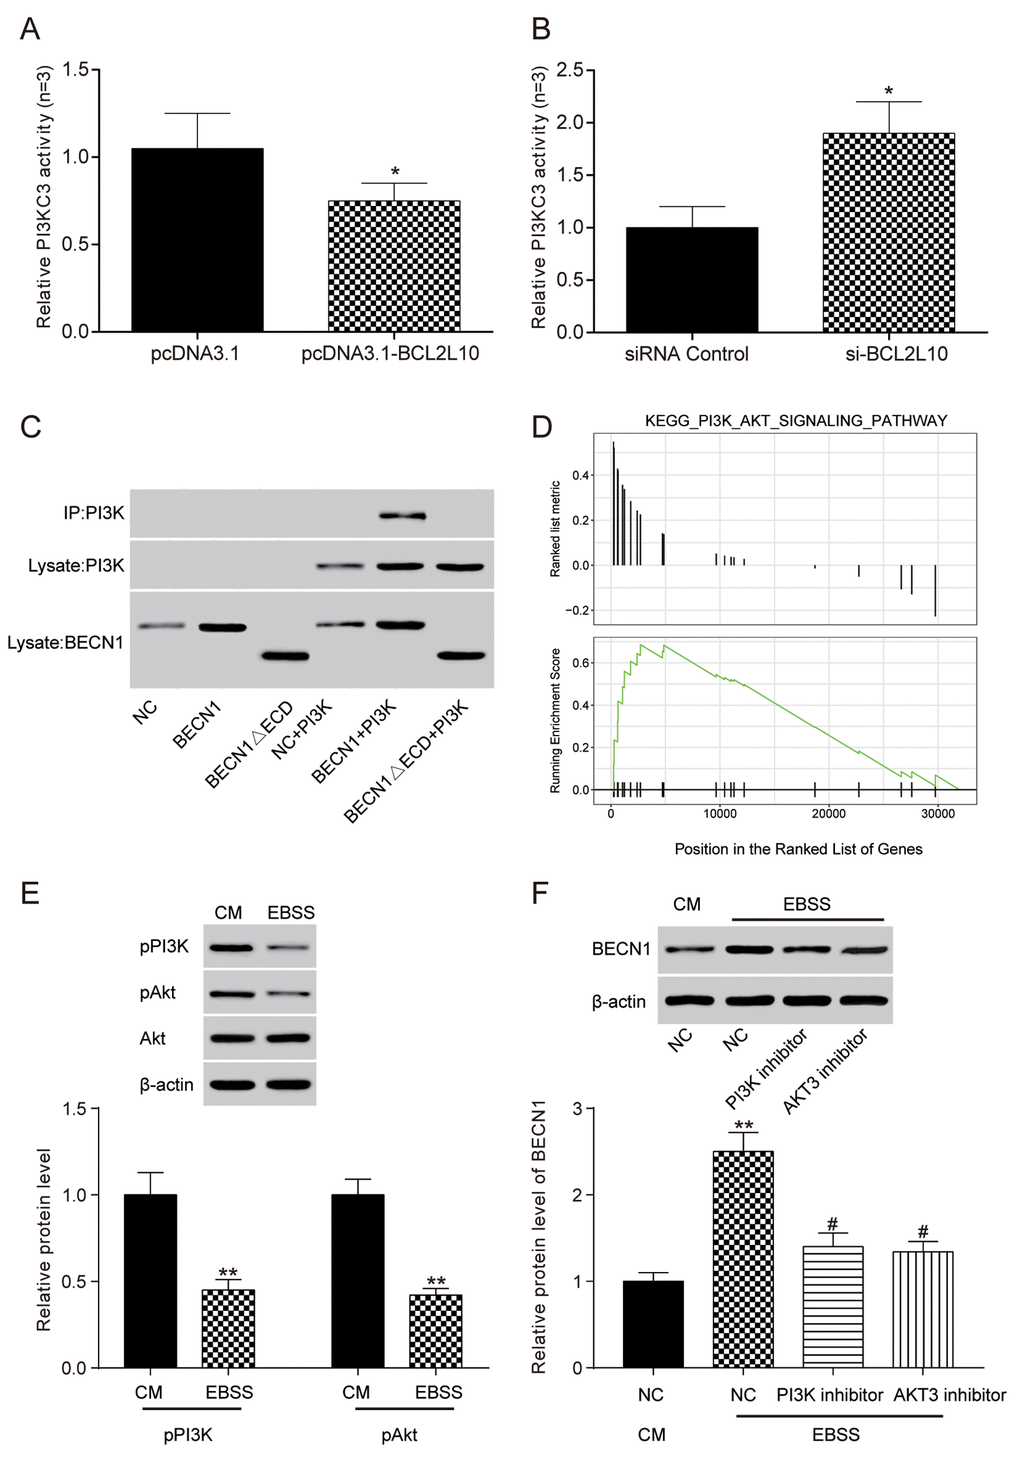 The combination of BCL2L10 and Beclin 1 reduced the bonding of Beclin 1 and PI3KC3 in Hep3B cell line. (A) The activity of PI3KC3 after the overexpression of BCL2L10 was detected by ELISA; (B) The activity of PI3KC3 after inhibiting BCL2L10 was detected by ELISA; (C) The binding relation between PI3KC3 and BECN1 was detected by co-immunoprecipitation. (D) Bioinformatics turned out that PI3K/Akt signaling pathway was enabled in HCC. (E) PI3K p110α and p-AKT protein level was detected by Western blot after autophagy induction. (F) The BECN1 protein level was detected by western blot after adding PI3K inhibitor and AKT inhibitor. * PPP